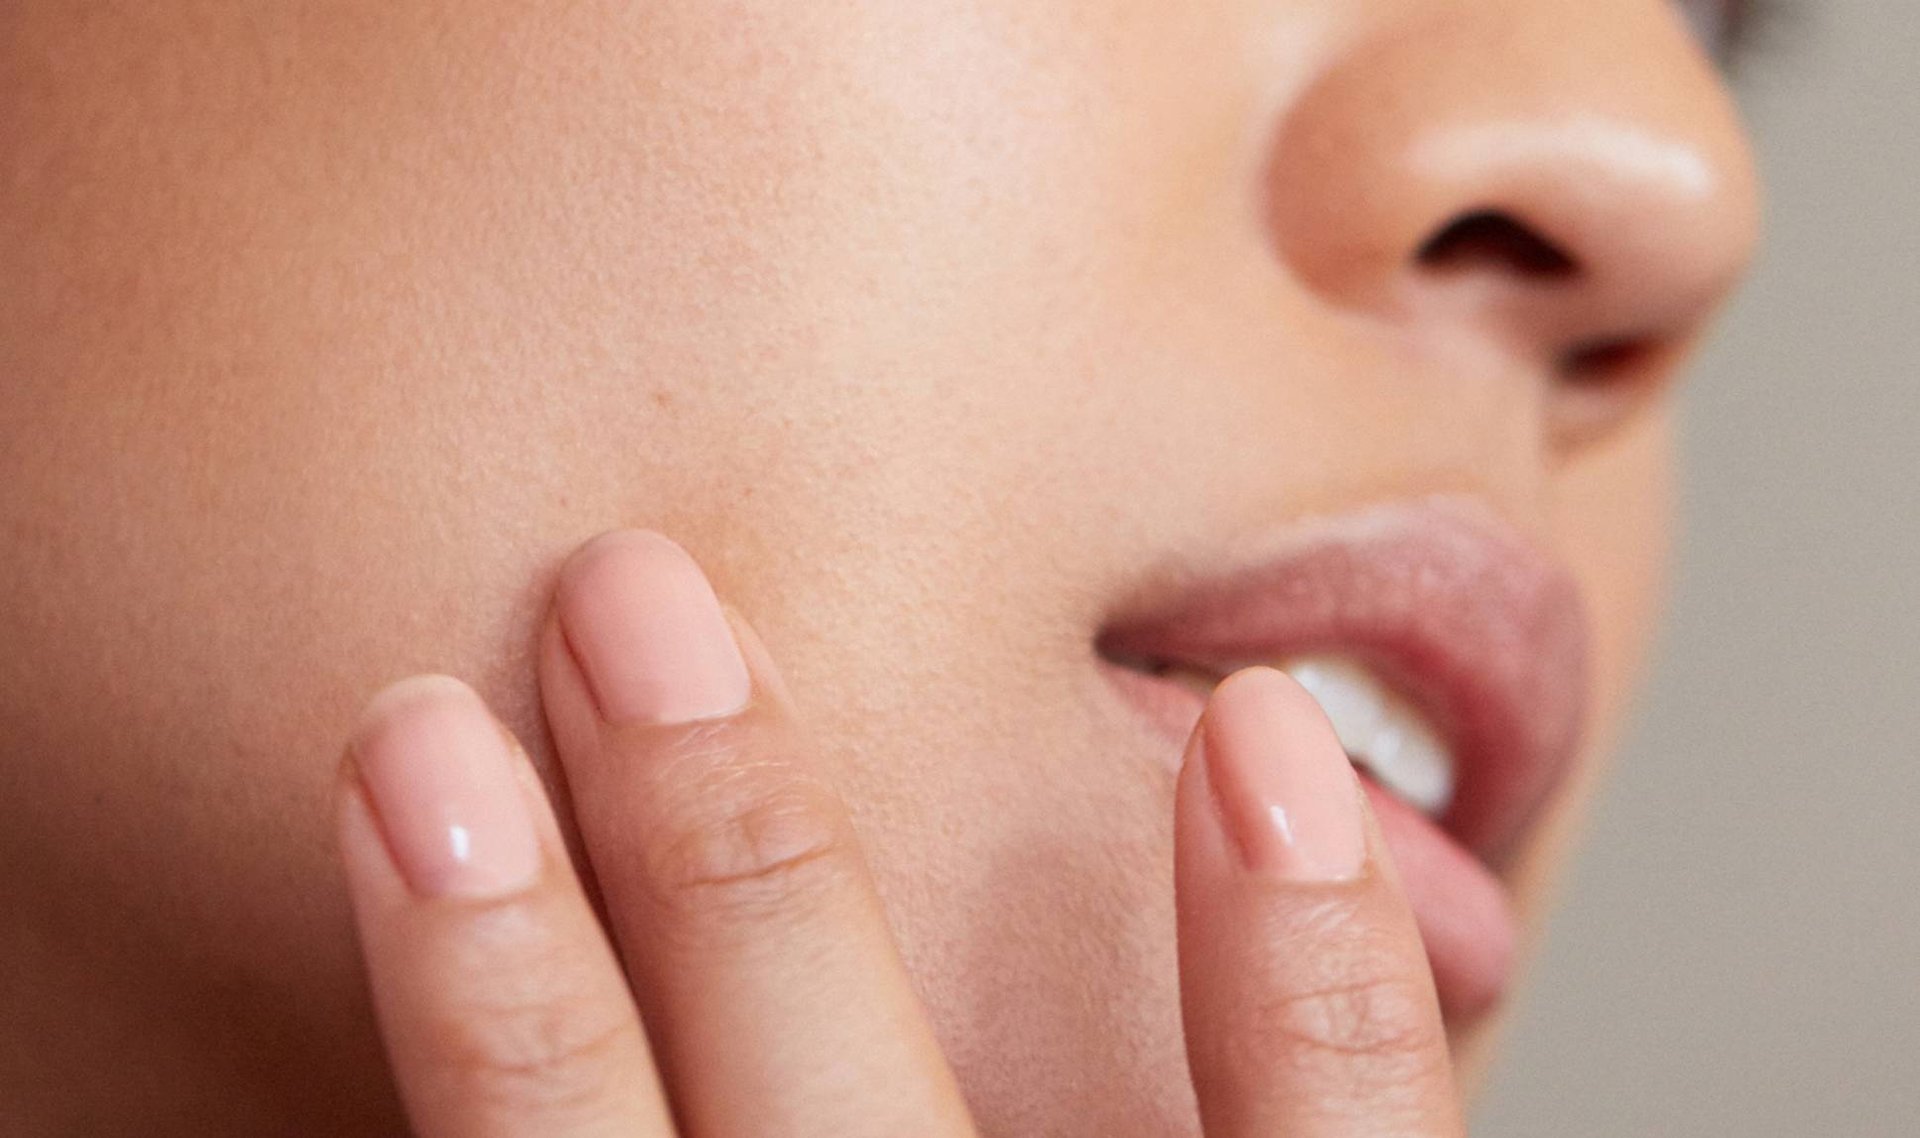 Is There a Scientific Link Between Acne and Depression? A Derm Weighs In